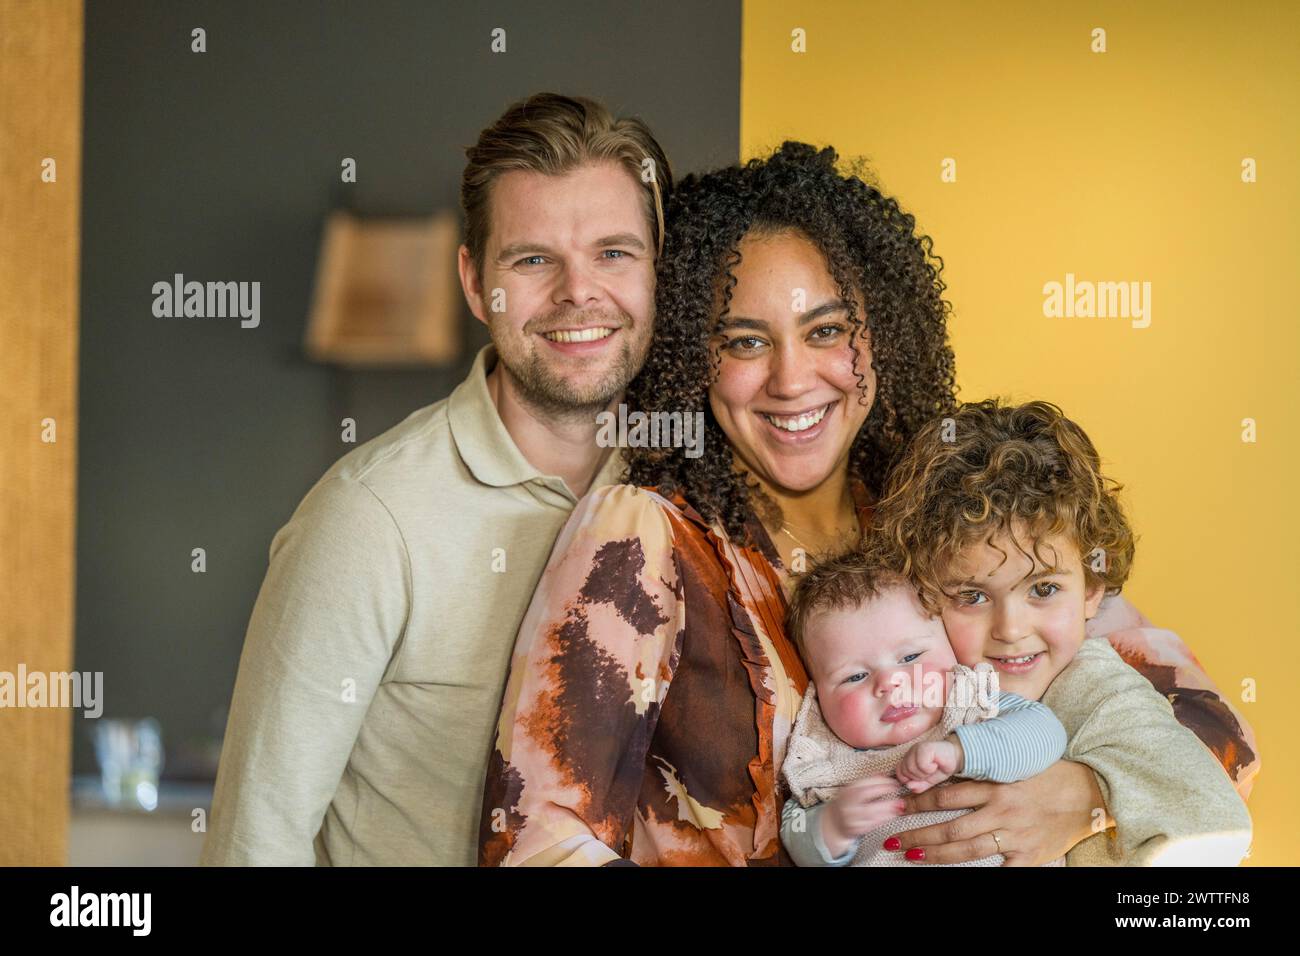 Happy family embracing at home with a cheerful vibe. Stock Photo